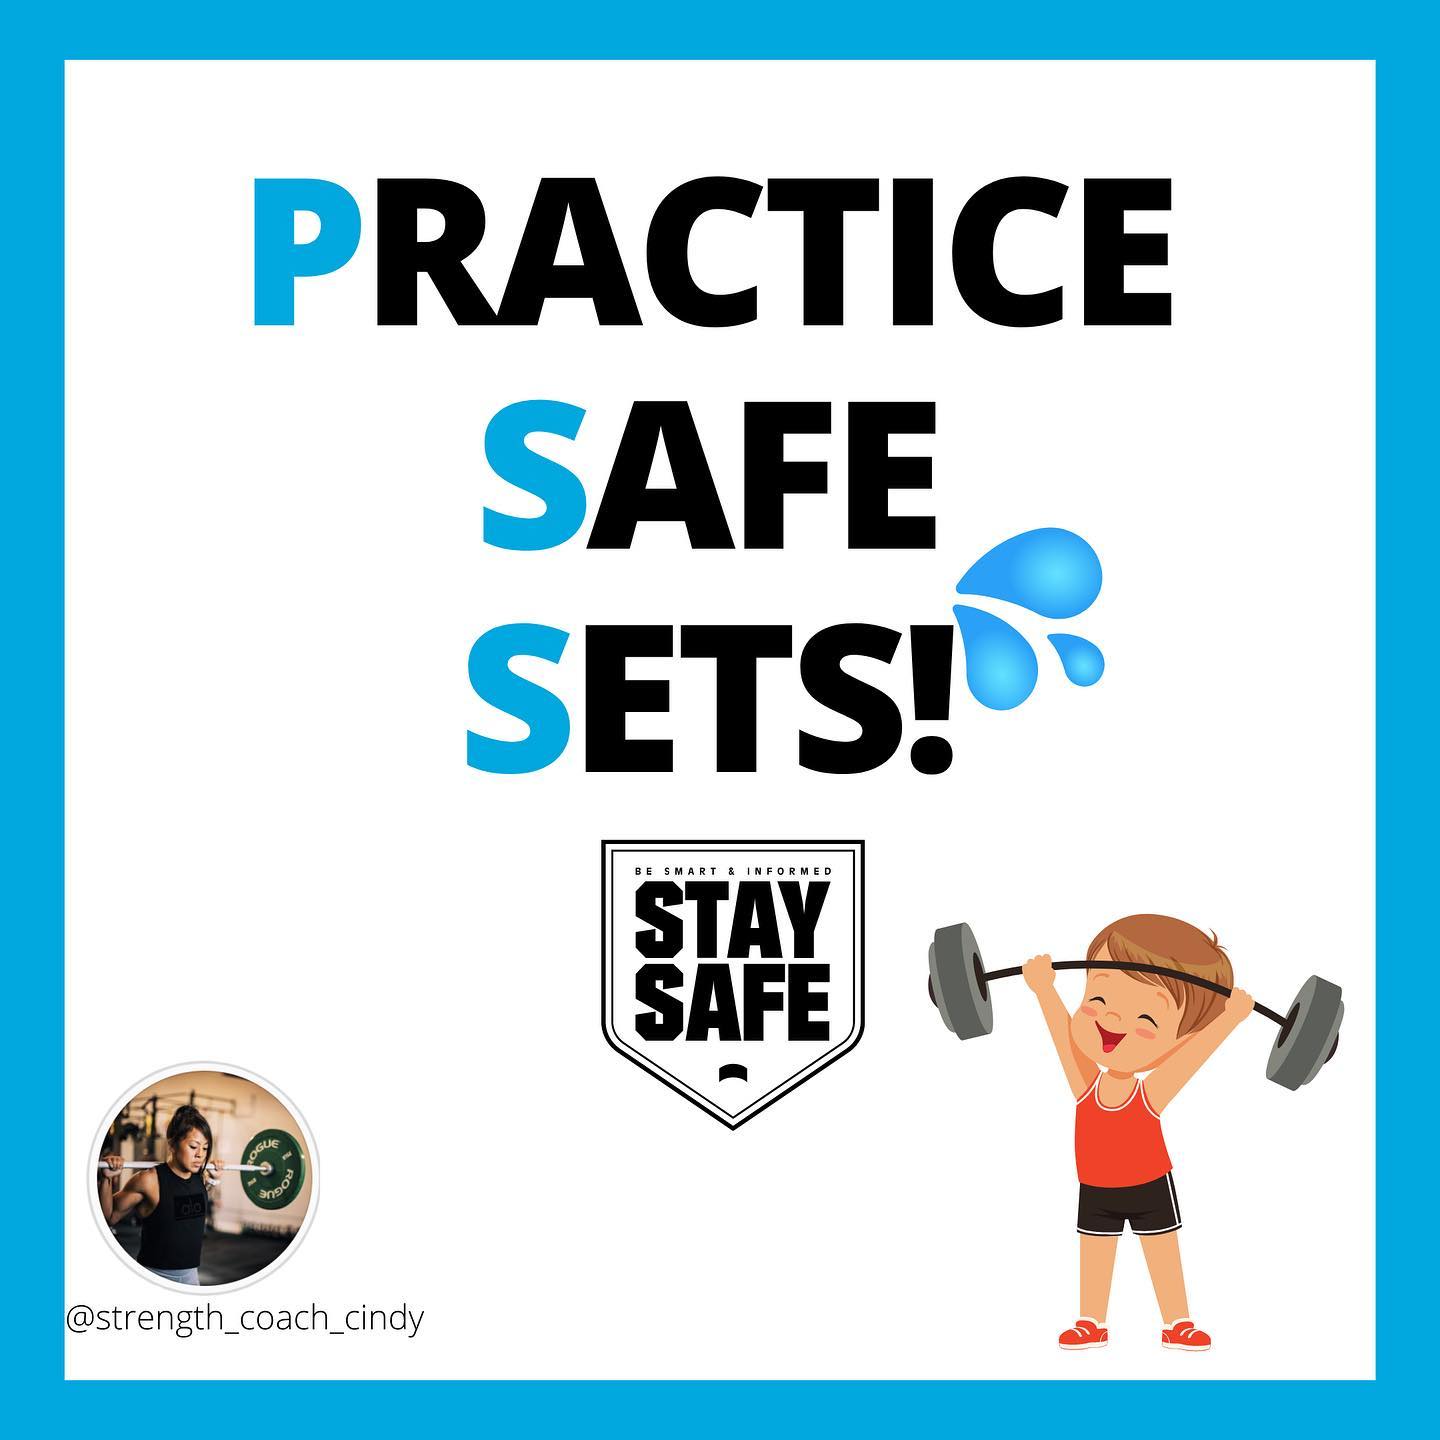 PRACTICE SAFE SETS
.
.
You should always be entering the playground with intention. Always practice safe sets when playing with toys (DB, KB, BB, etc) especially with another lifting partner. 
.
WASH THOSE DIRTY HANDS OF YOURS.
Good hygiene is important!

STRAP ON A COLLAR.
Those weights shouldn’t be shifting around on the barbell.
.
CHOKE THAT BAR WITH A FIRM GRIP.
We don’t want that barbell slipping away from us.
.
KEEP GOOD POSITIONS. 
Your body loves it more that way and will thank you later.
.
VARY THE TEMPO.
Controlled and gentle on the way down. Aggressive on the way up. Thats the way the barbell likes it. 
.
DOMINATE. 
Because you like telling the barbell what to do.
.
RINSE OFF. Now that you made a mess. Wash those  toys and dirty hands again like the naughty boy/girl you are.
.
REPEAT. 
Do it all over again because you love the way it makes you feel.
.
.
.

——————————————-
 Follow:  IG @strength_coach_Cindy
️ Download Free Macro Calculator for Lifters : Link in Bio
 Apply for 1-on-1 Online Coaching: Link in Bio
——————————————-
.
.